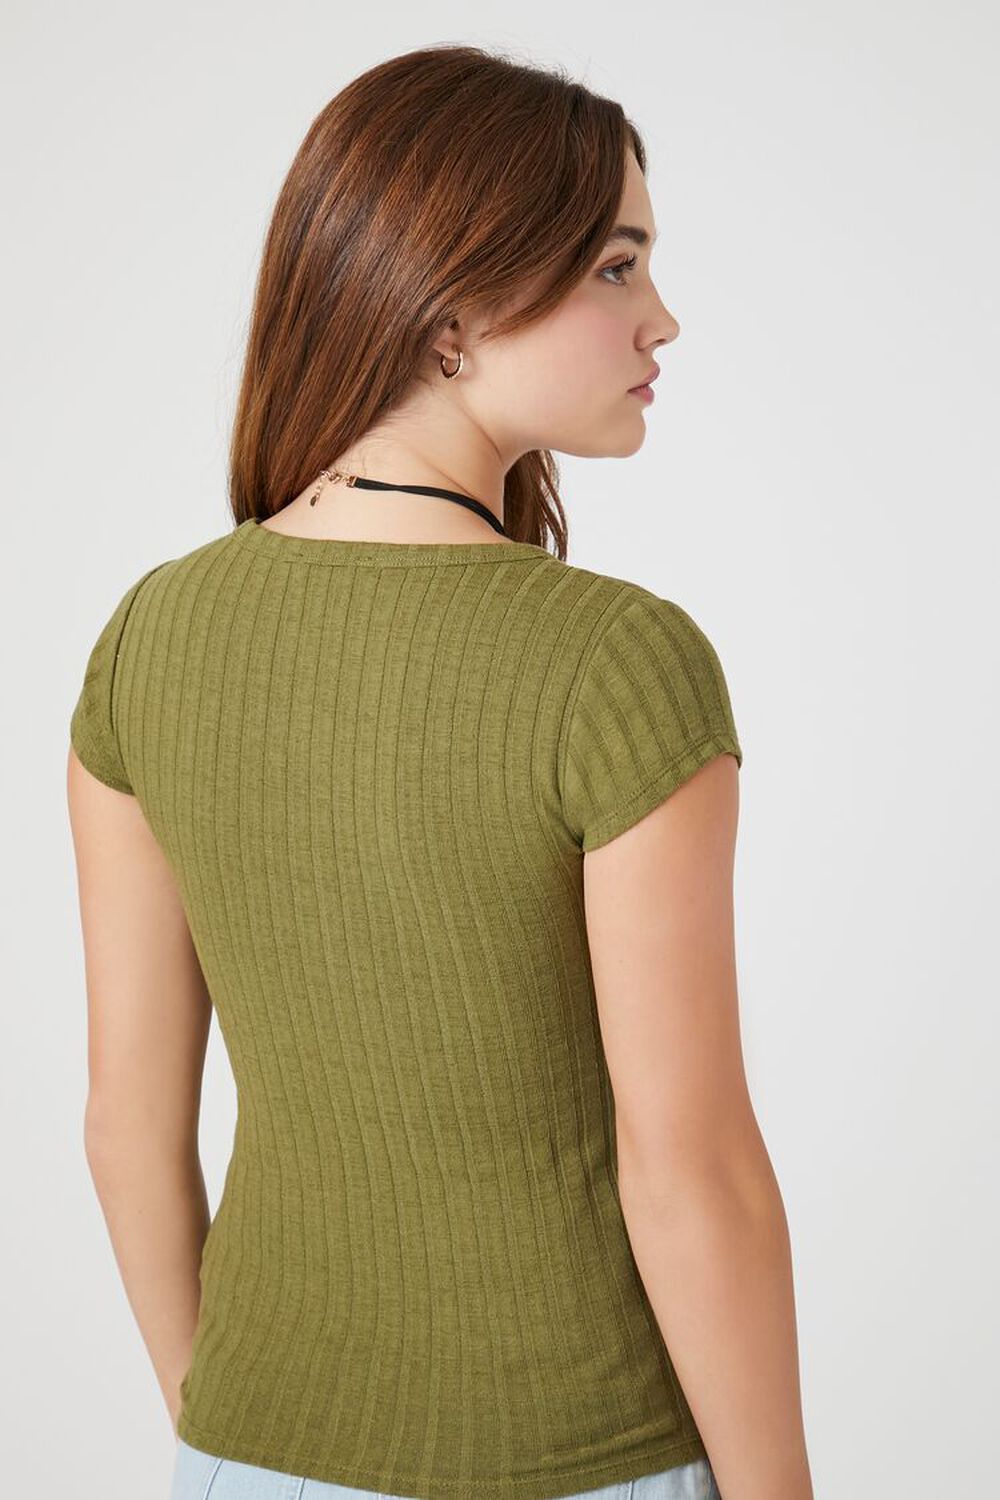 OLIVE Rib-Knit Buttoned Baby Tee, image 3